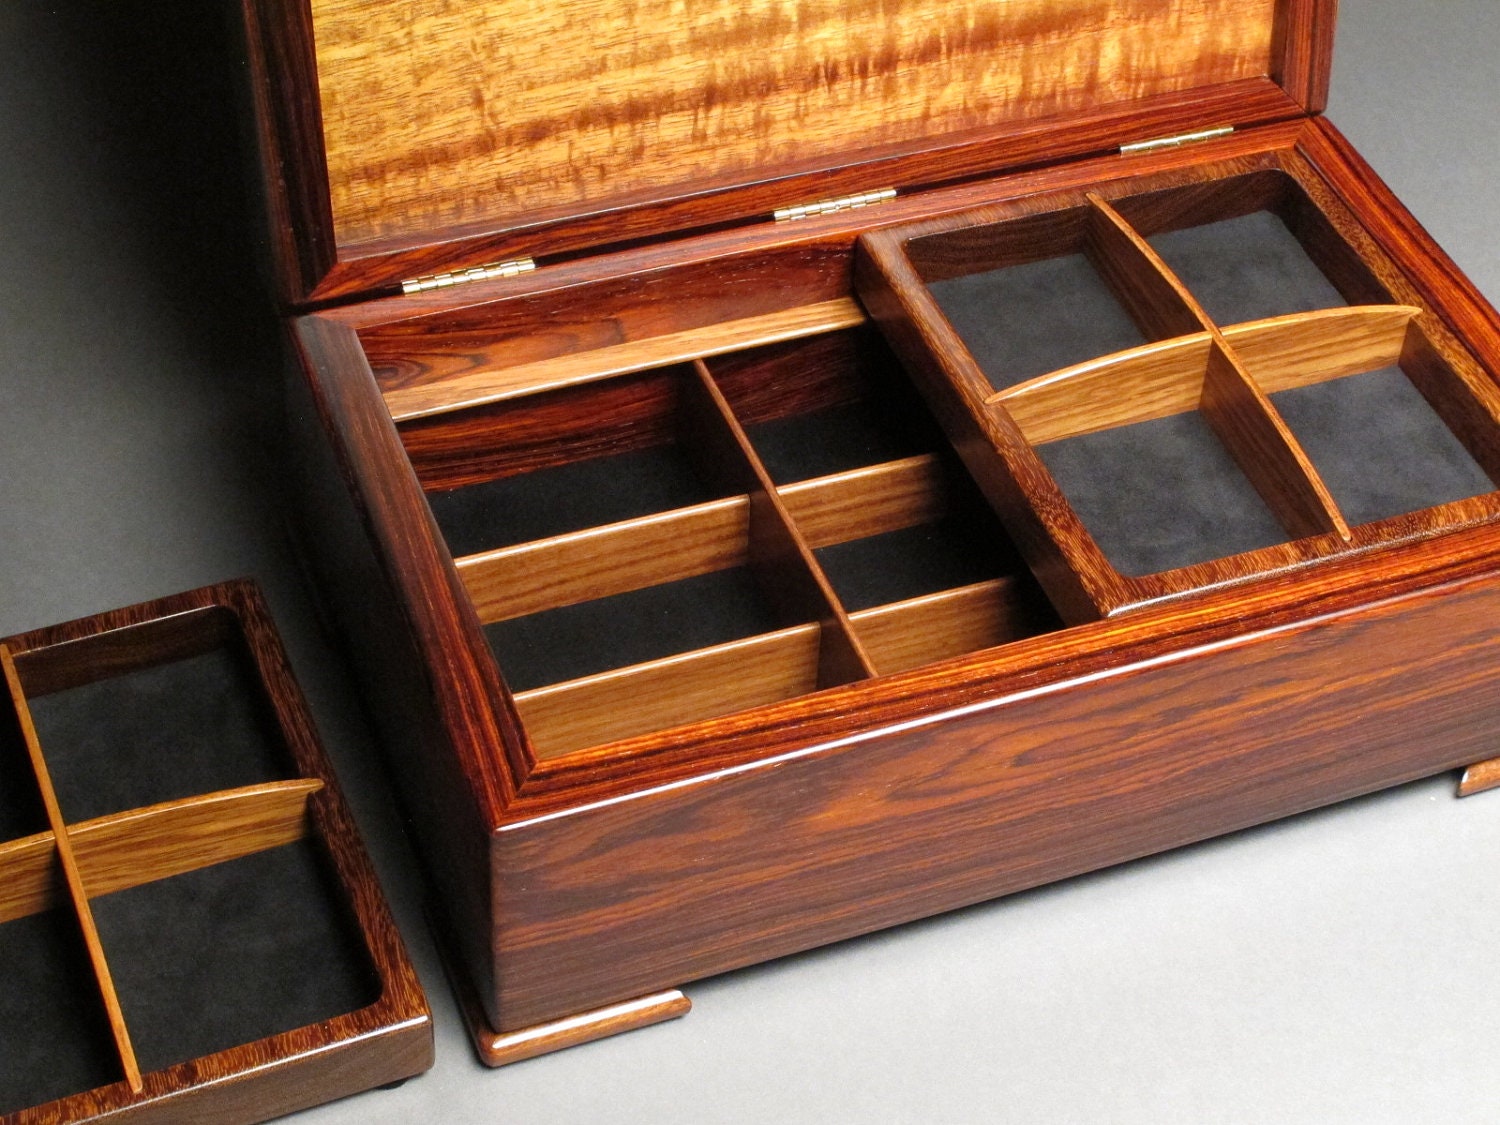 secret compartment woodworking plans and information at Images 